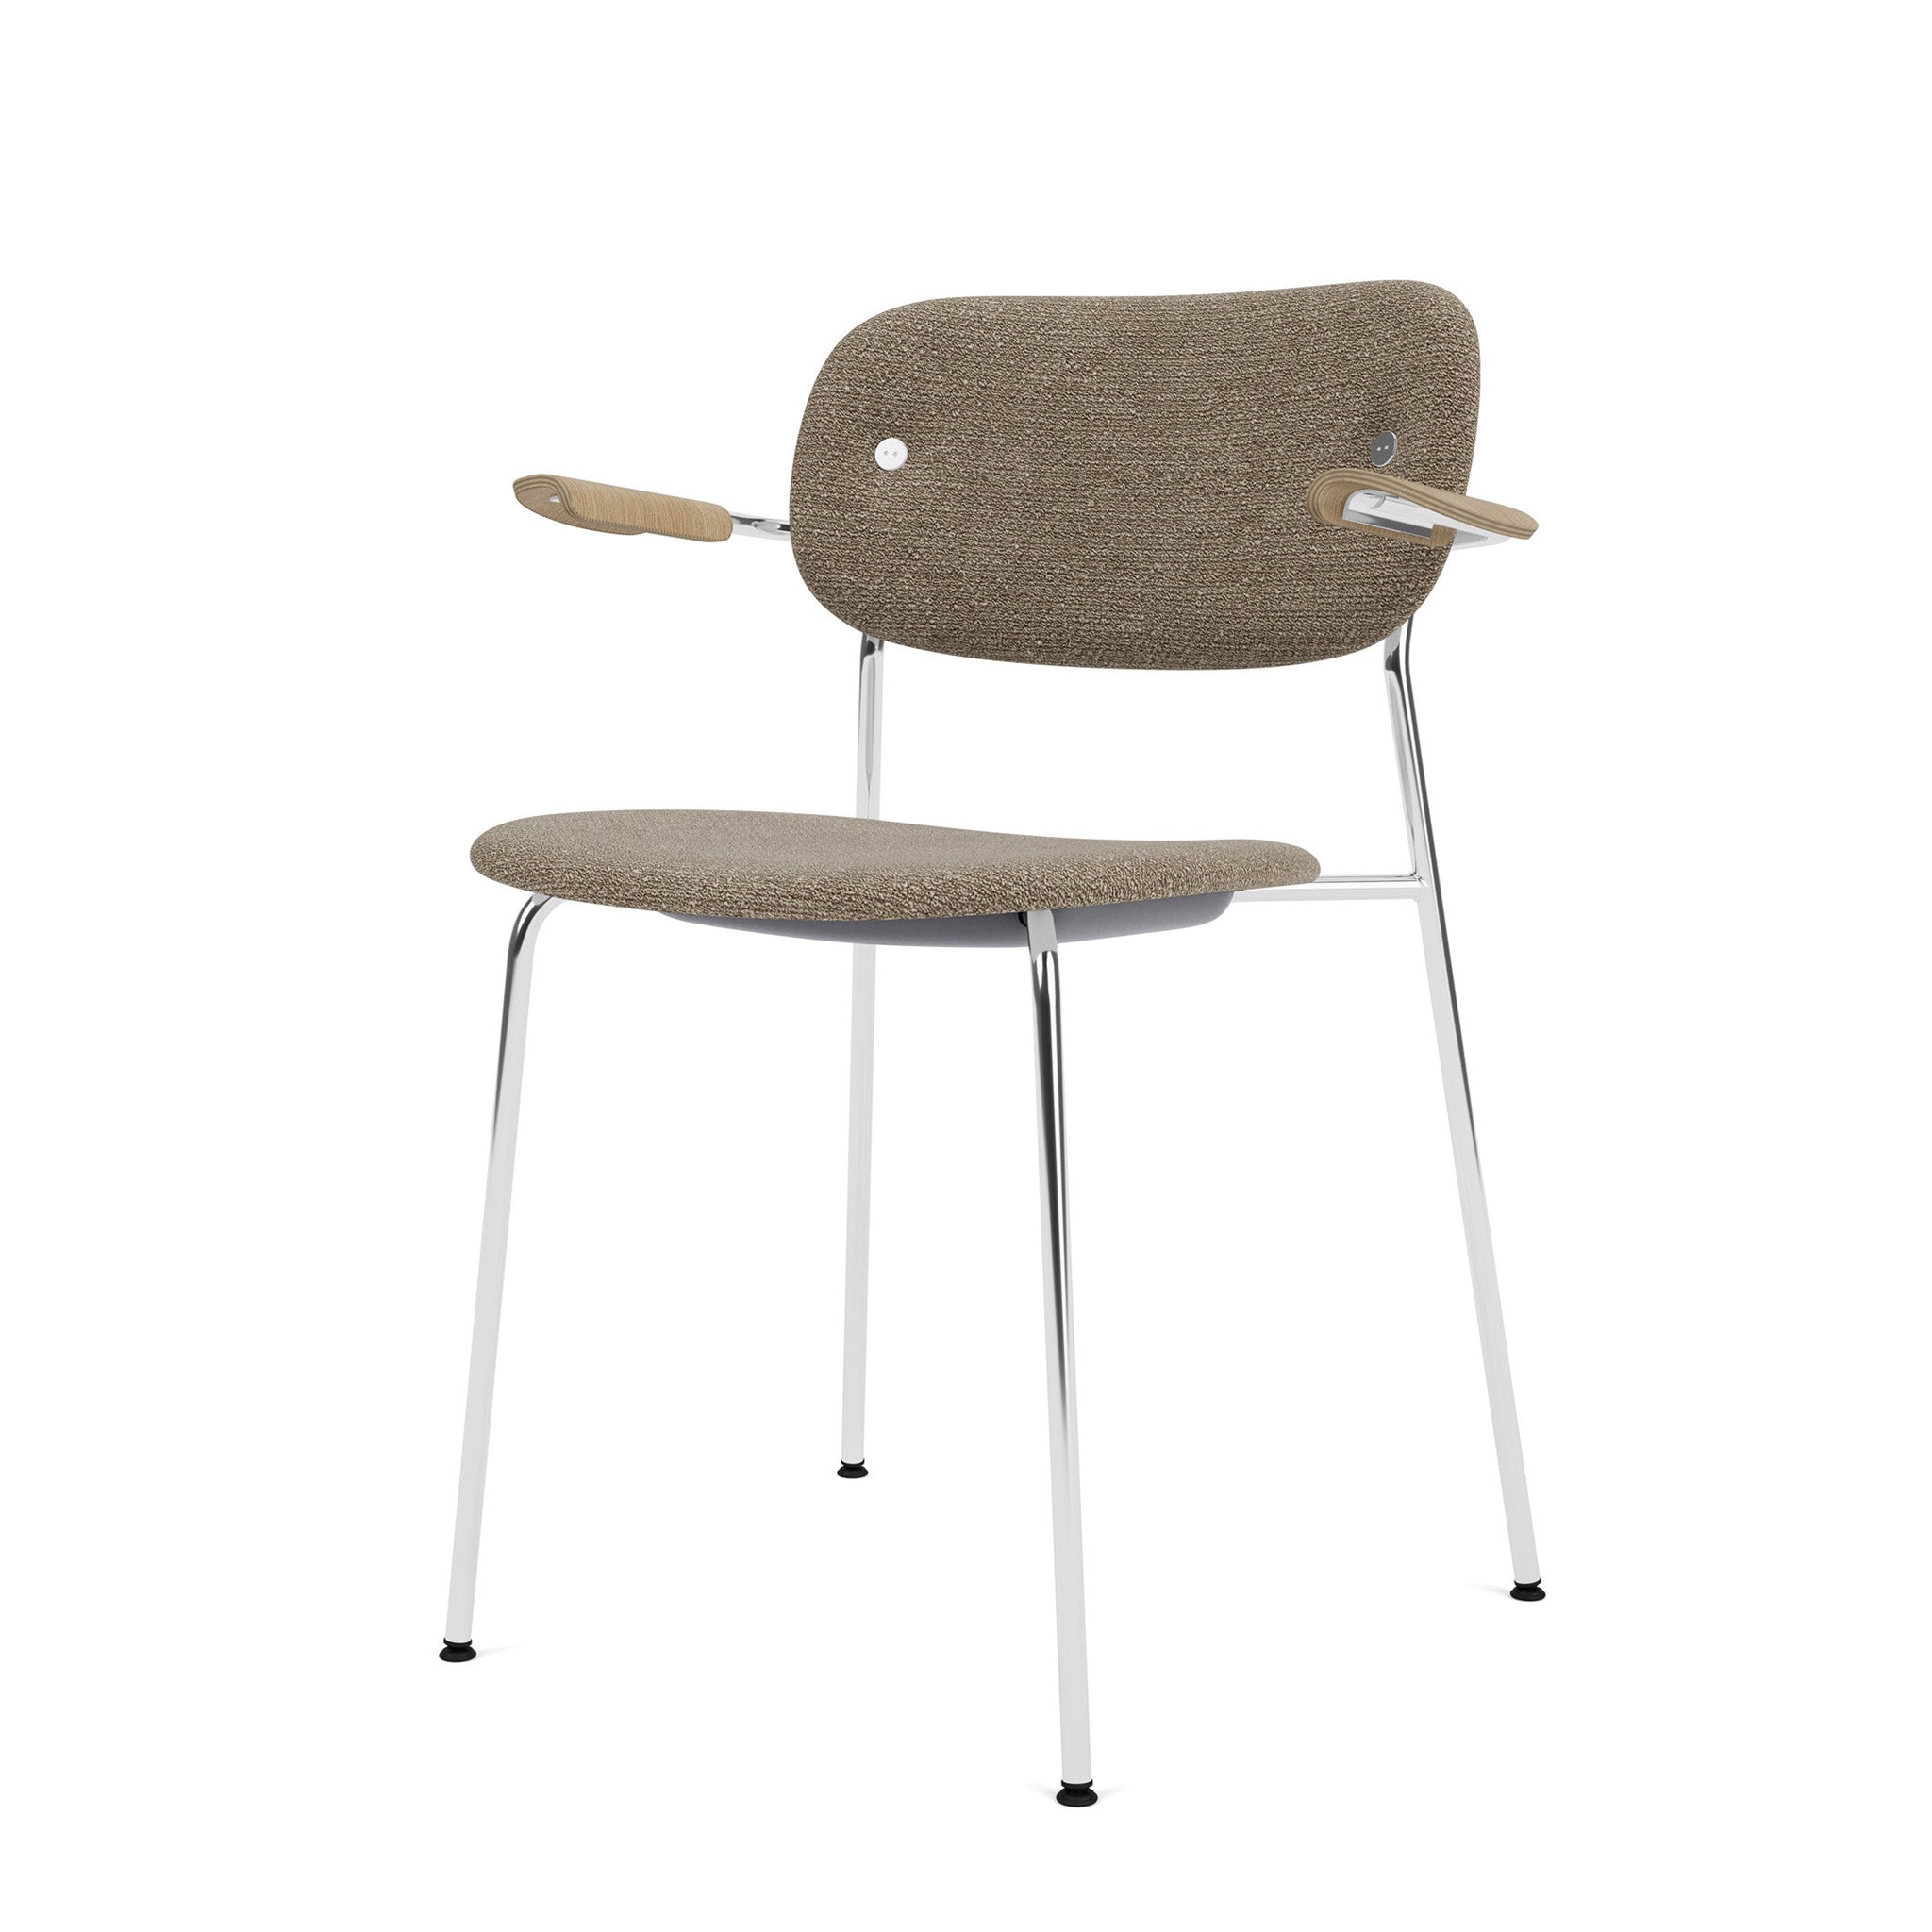 Co Chair, Fully Upholstered With Armrests by Norm Architects & Els Van Hoorebeeck